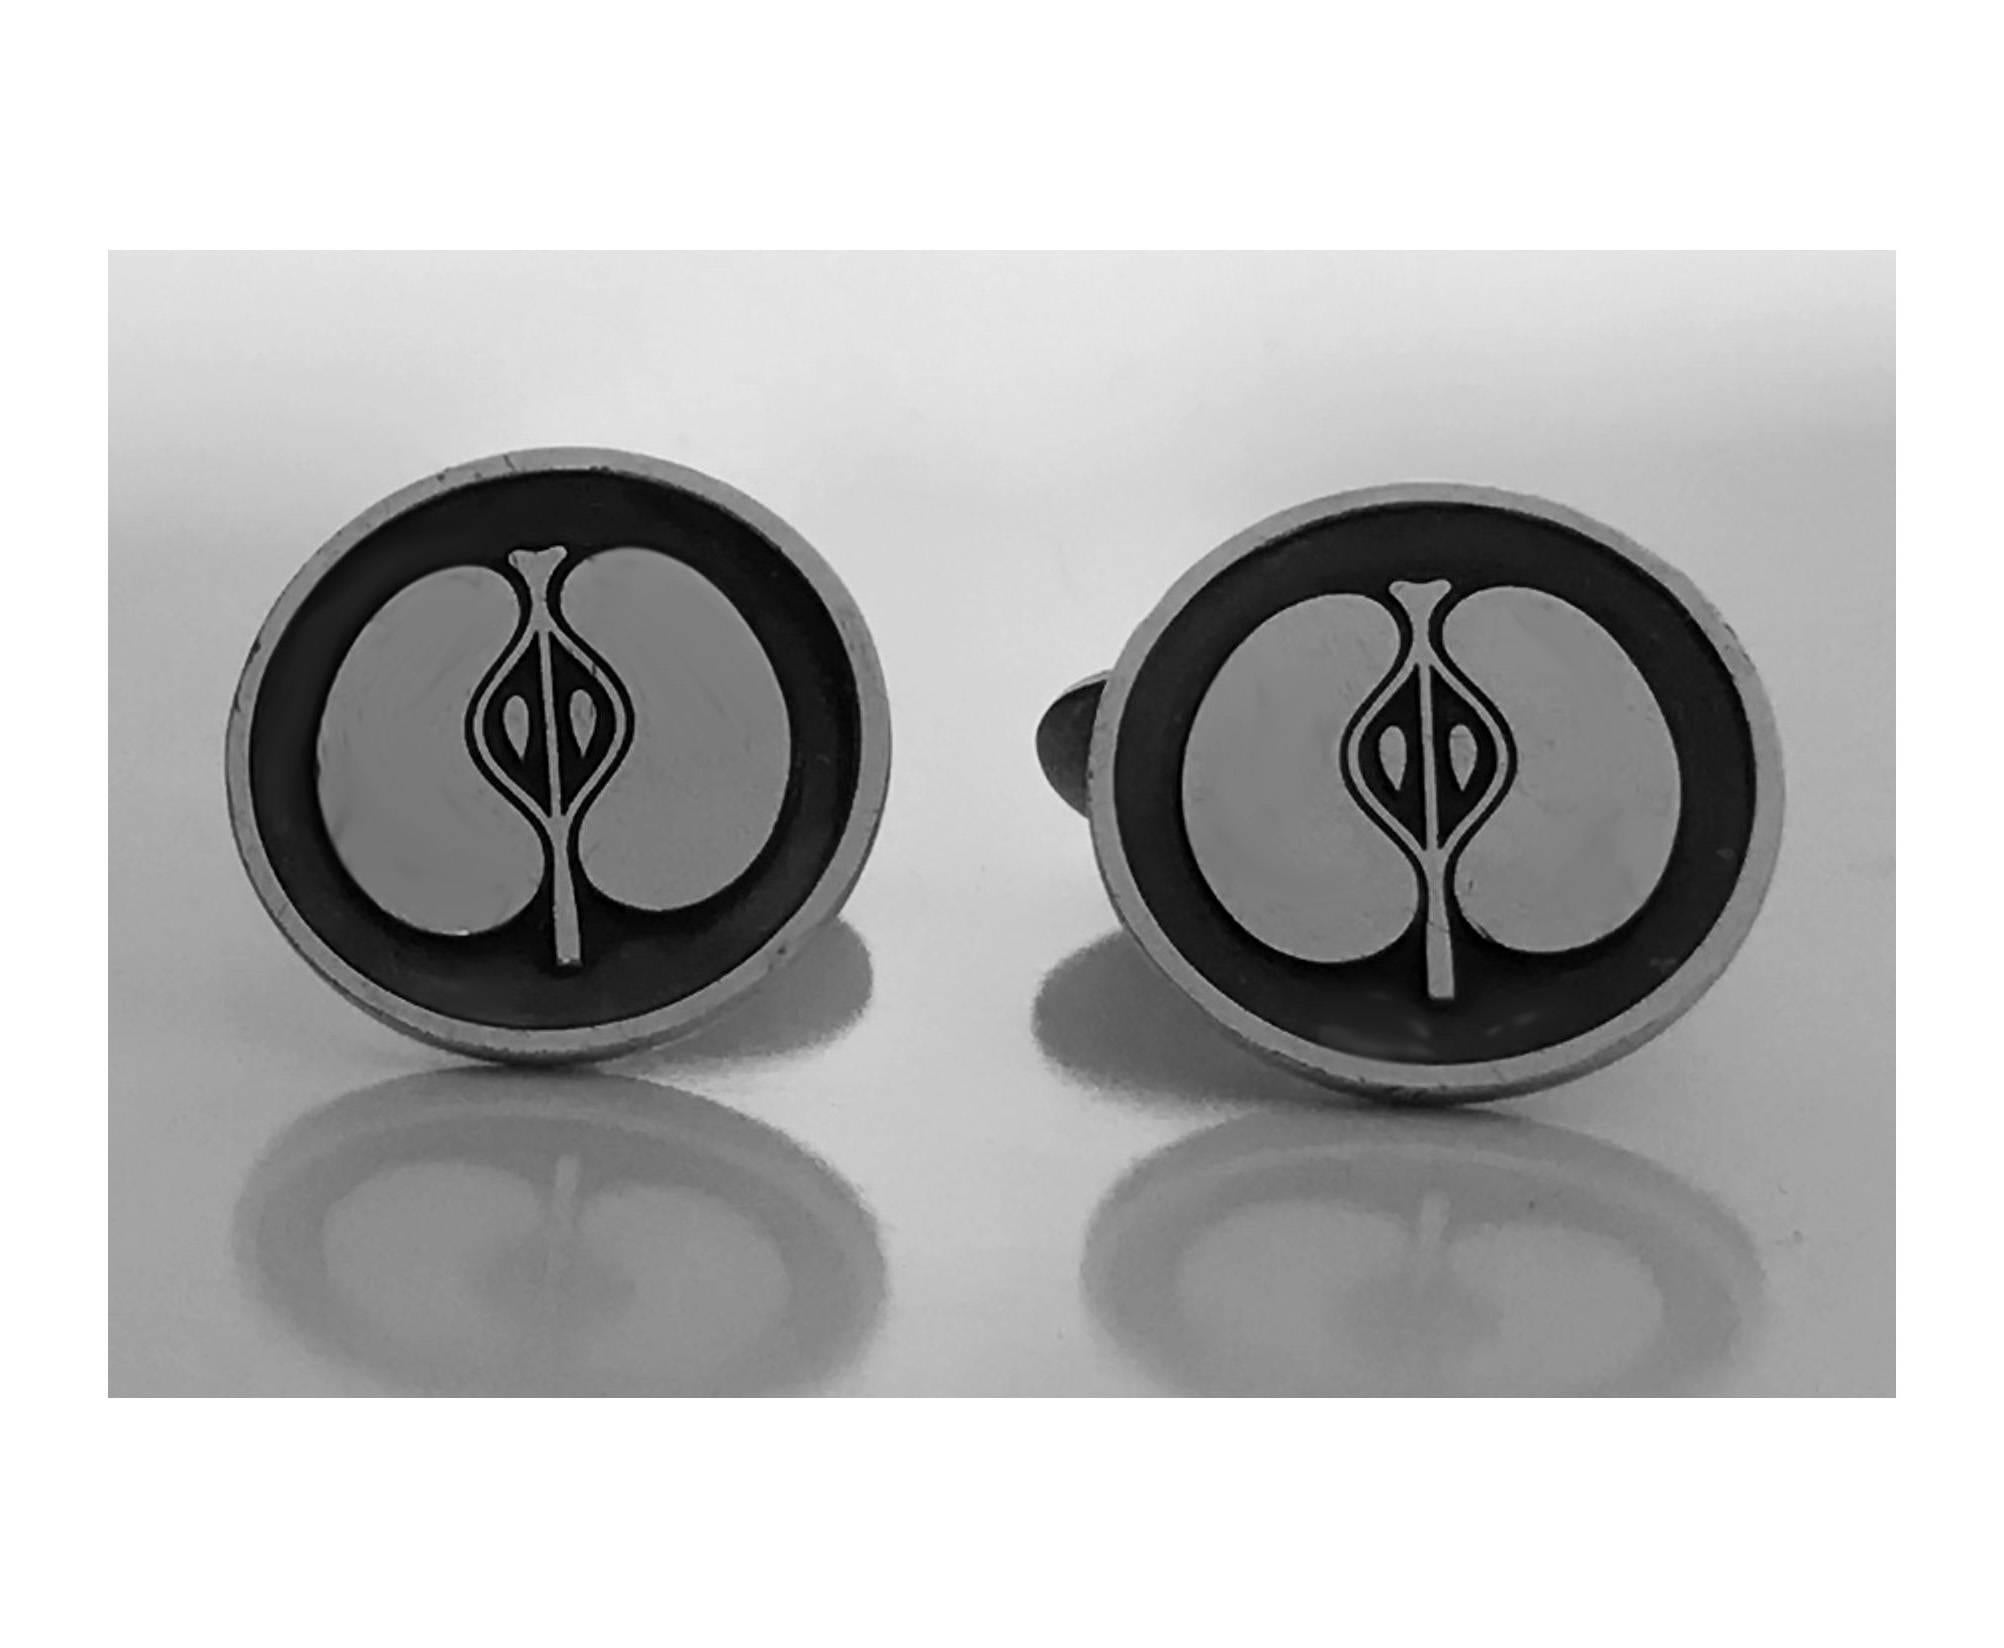 Georg Jensen Sterling `Apple’ Cufflinks, oxidised niello finish, the round sterling silver discs with raised apple motif t bar fittings , signed and numbered 111. Diameter: 7/8 inches. Item Weight: 22.16 grams.